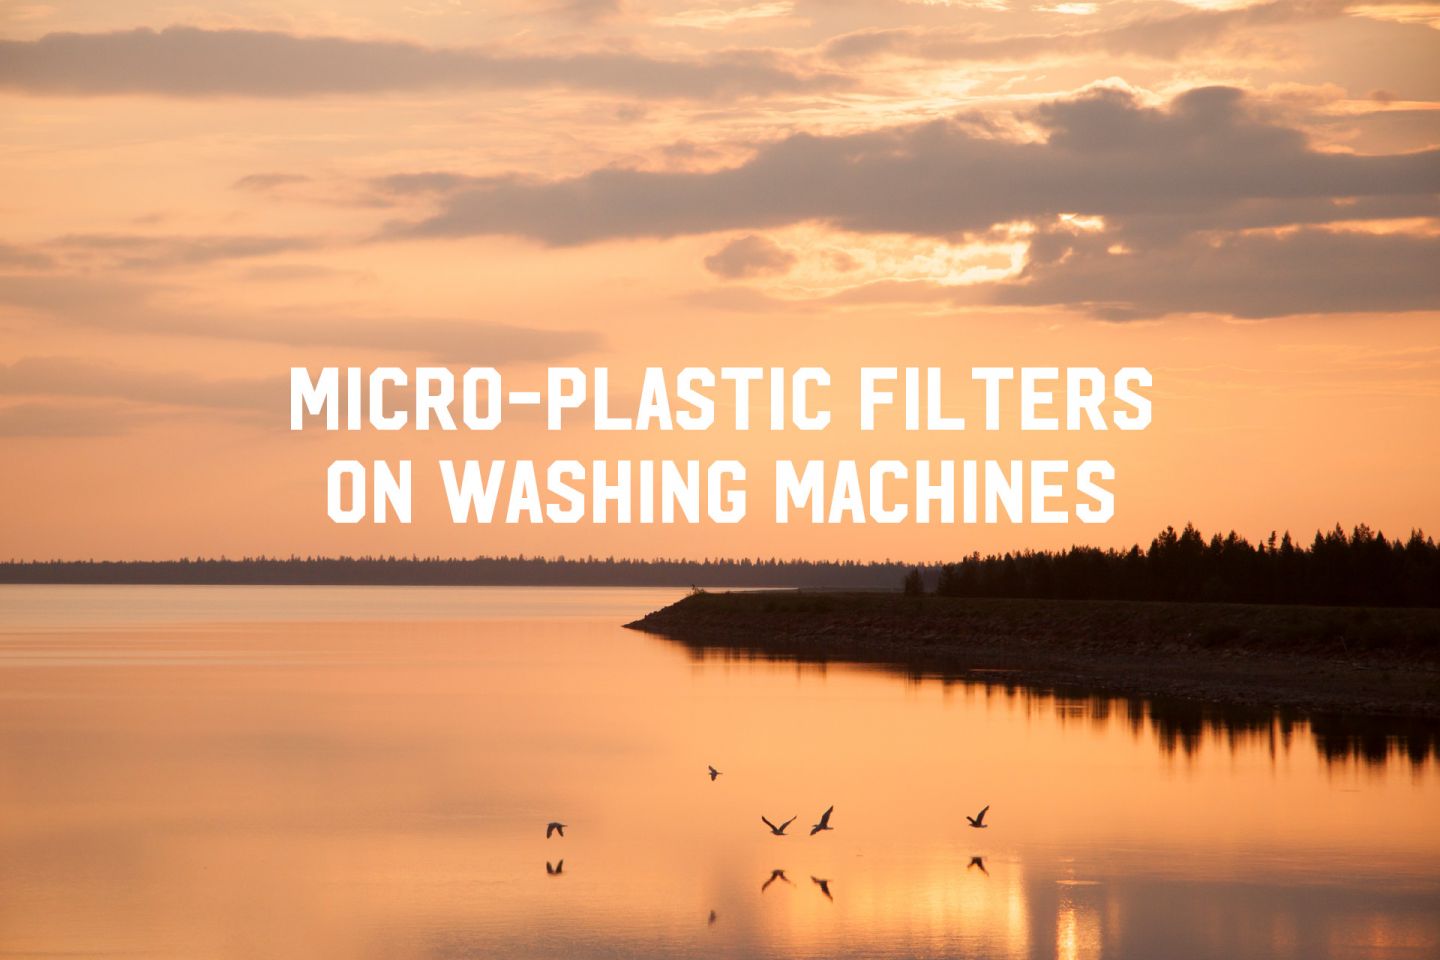 Micro-plastic filters on washing machines